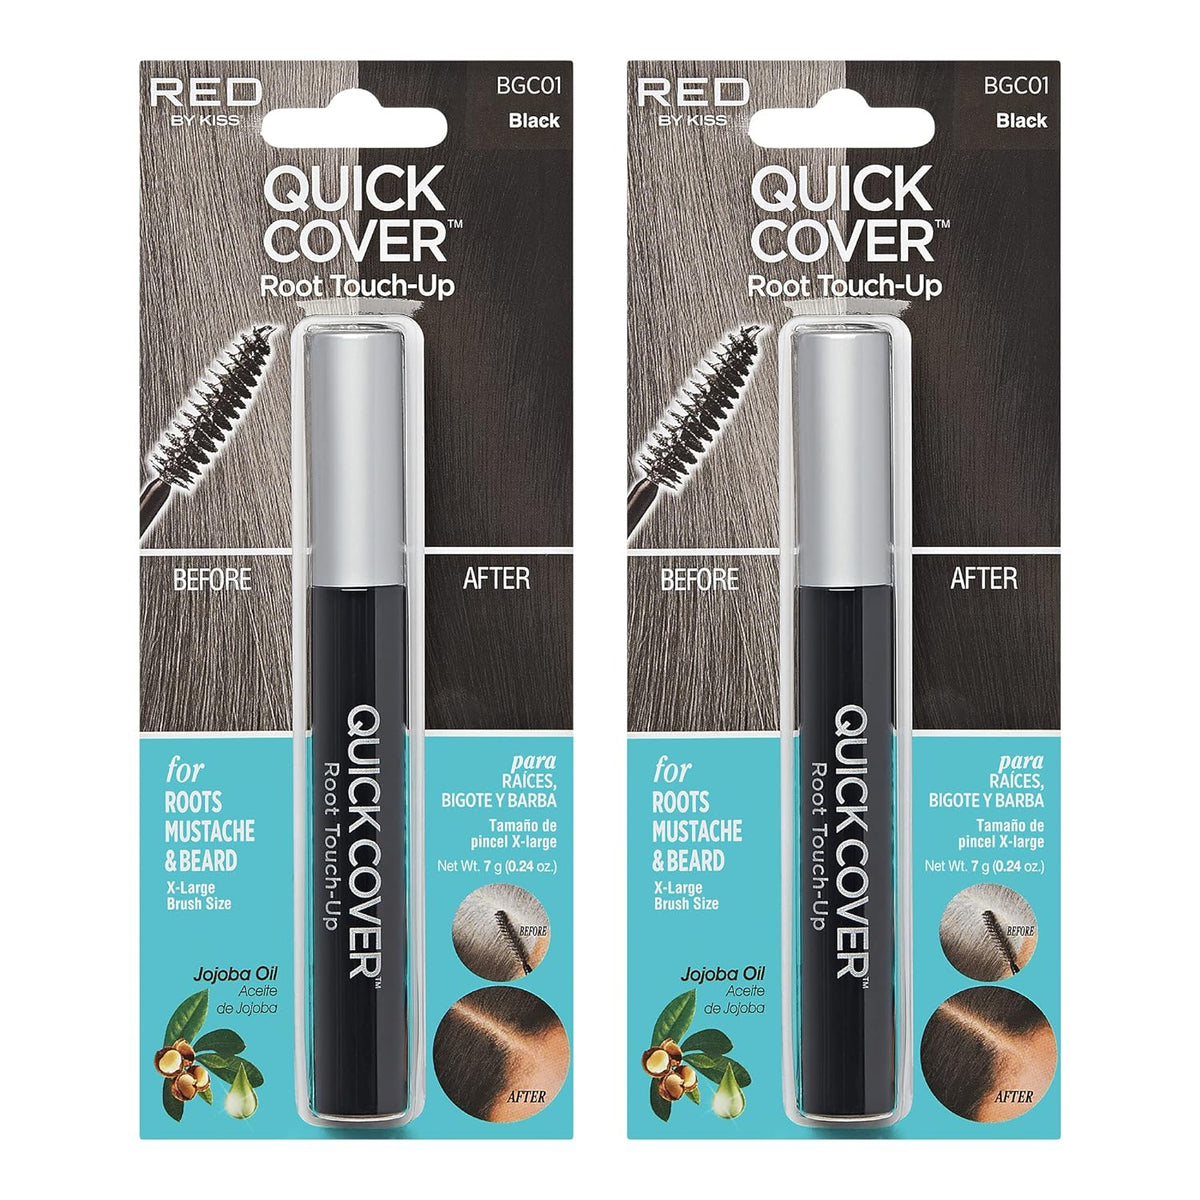 RED by  Quick Cover Root Touch up Rescue, Mascara Natural Water-Resistant Temporary Gray Concealer Cover up Brush for Hair Mustache & Beard (Black) (2Pcs)